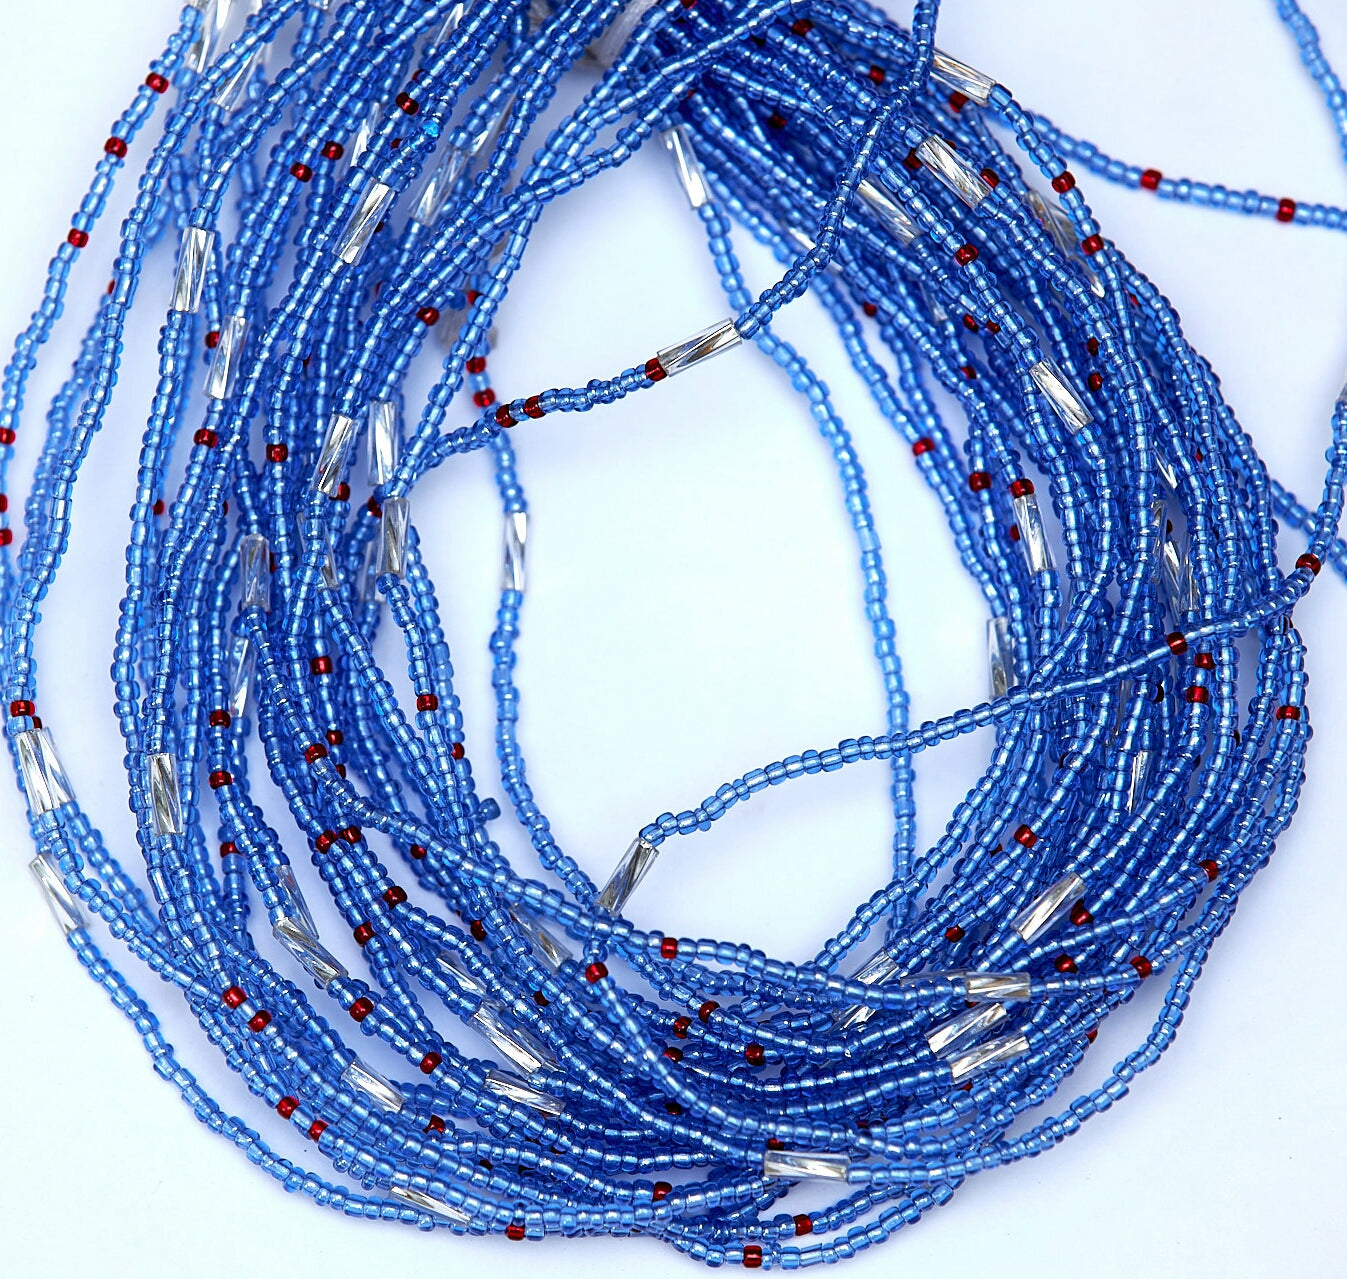 42 Inches Blue And Red Beads with silver Bars tie on Waist beads